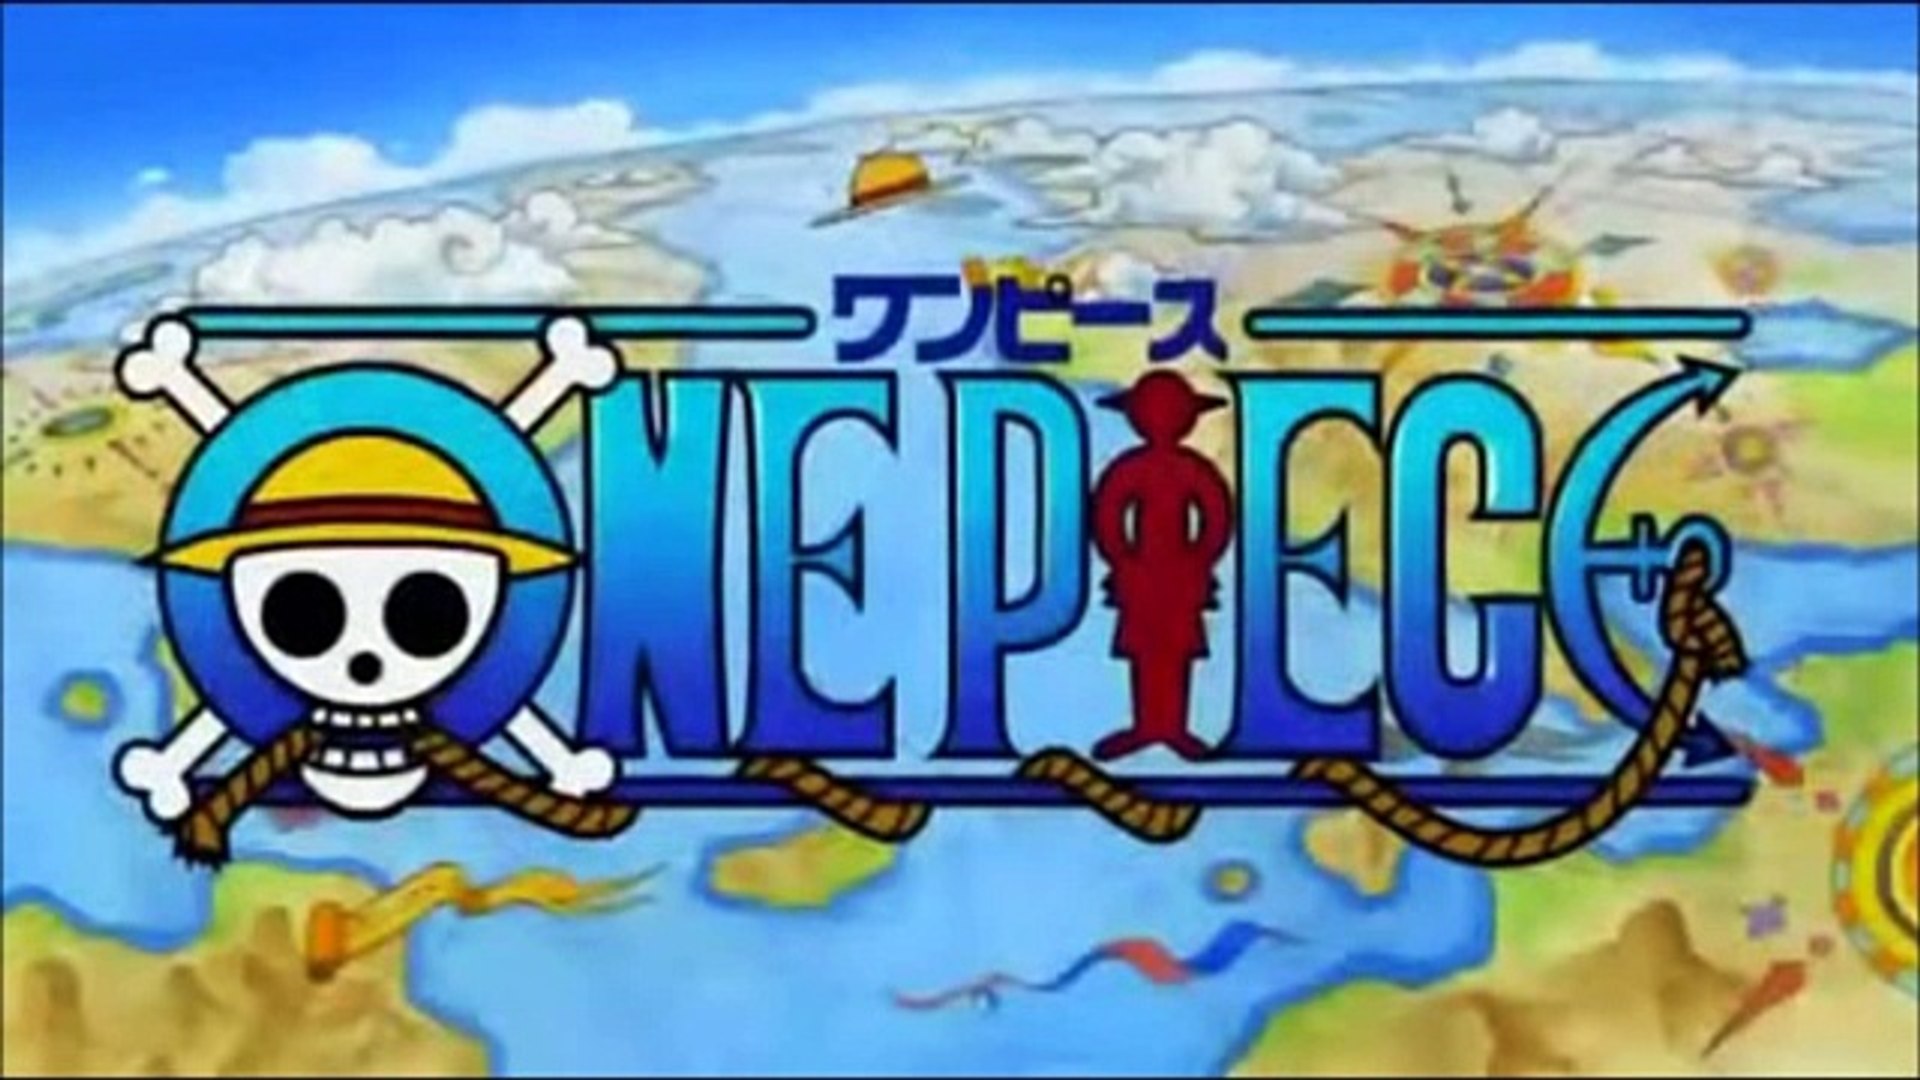 Stream One Piece OP 1 - We Are! Lyrics by Anime Stereo (Free